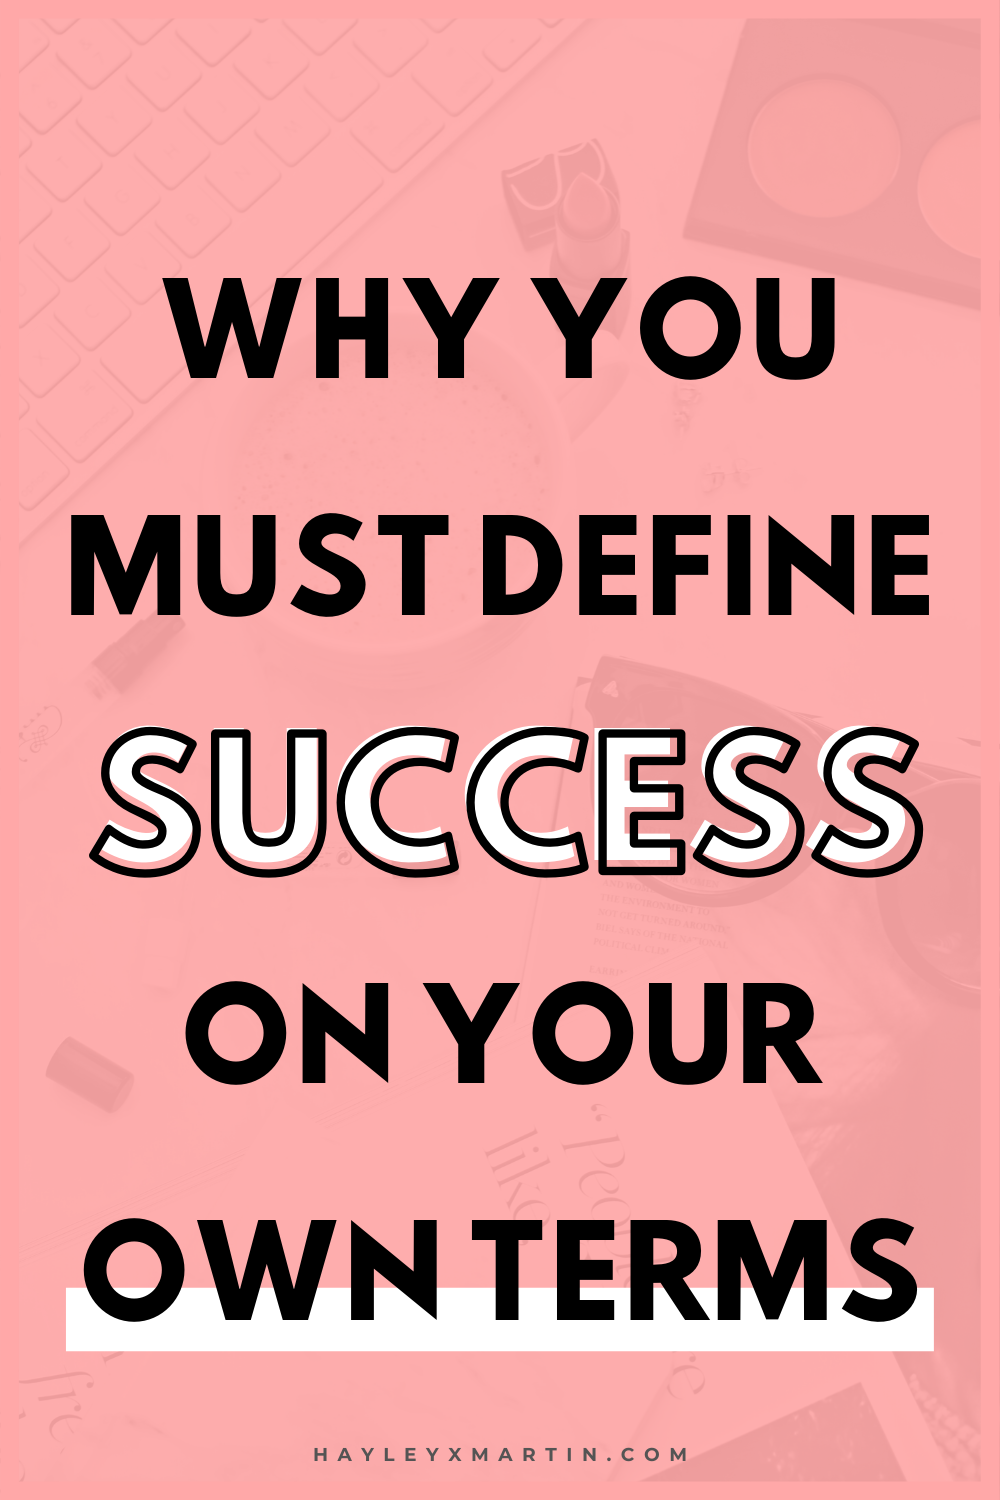 WHY YOU MUST DEFINE SUCCESS ON YOUR OWN TERMS | HAYLEYXMARTIN